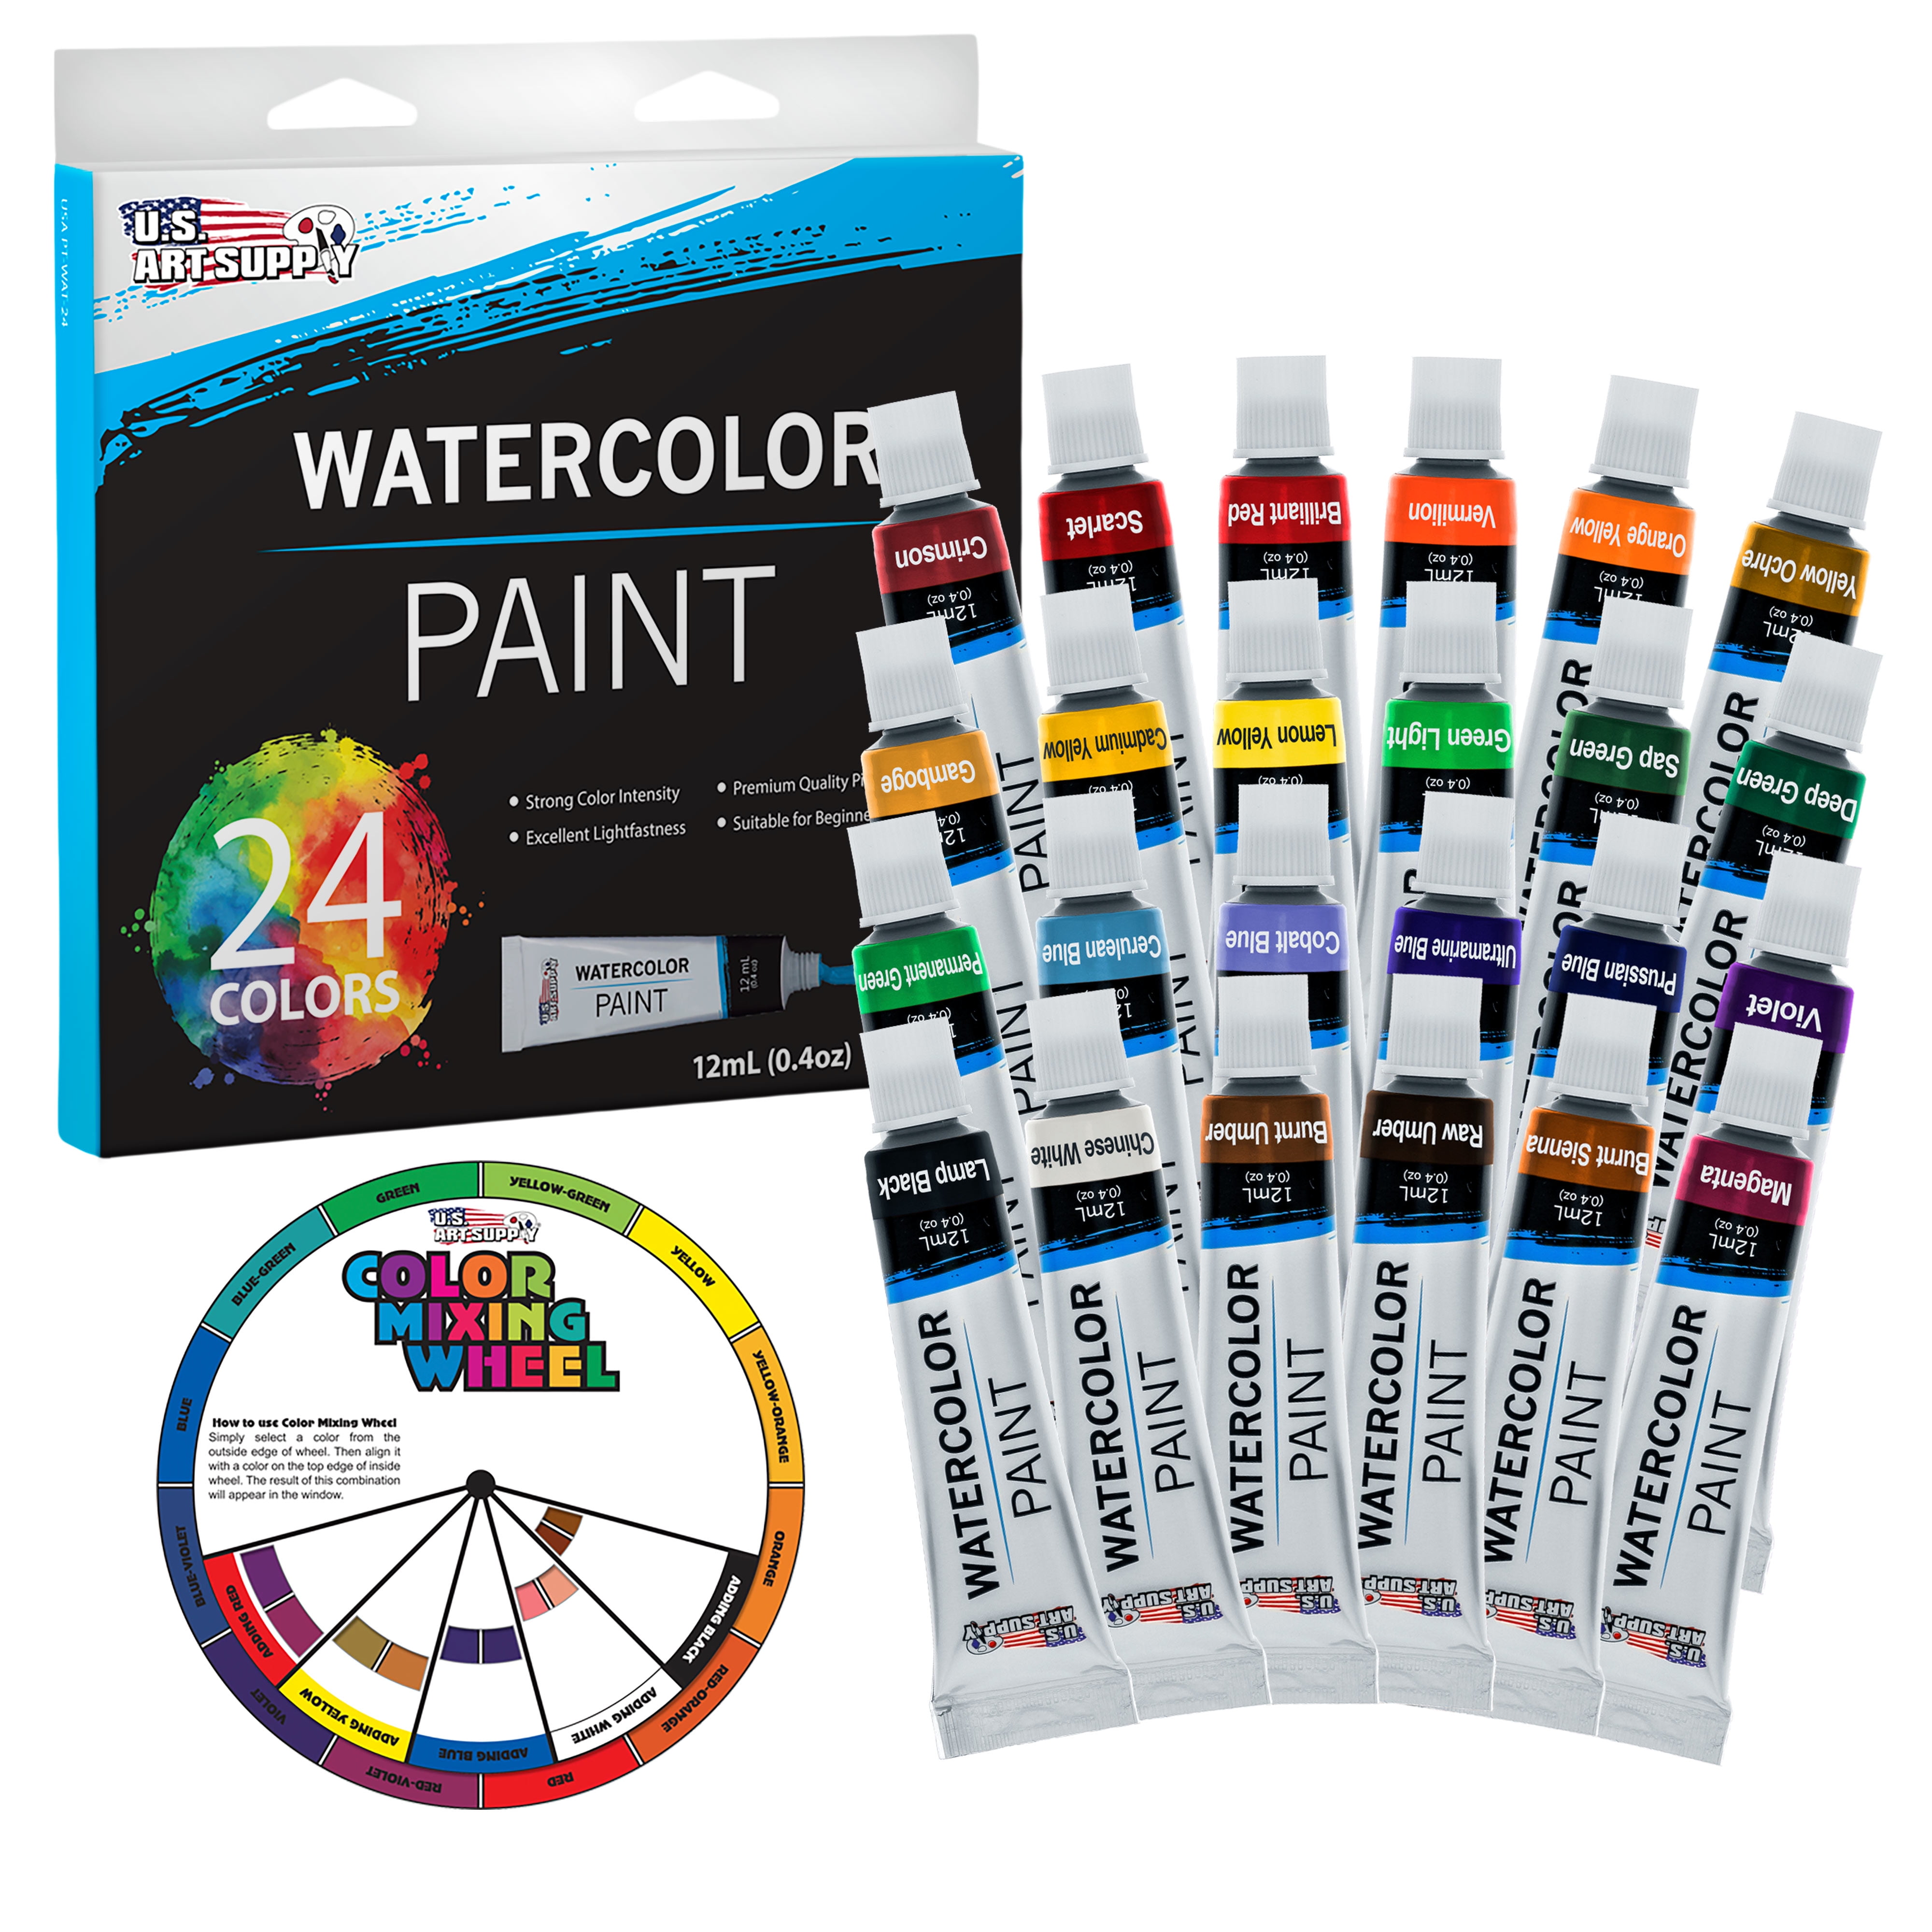 GenCrafts Watercolor Paint 50 Colors Set 12ml/ 0.4oz. - Quality Non Toxic  Pigment Paints for Canvas, Fabric, Crafts, and More